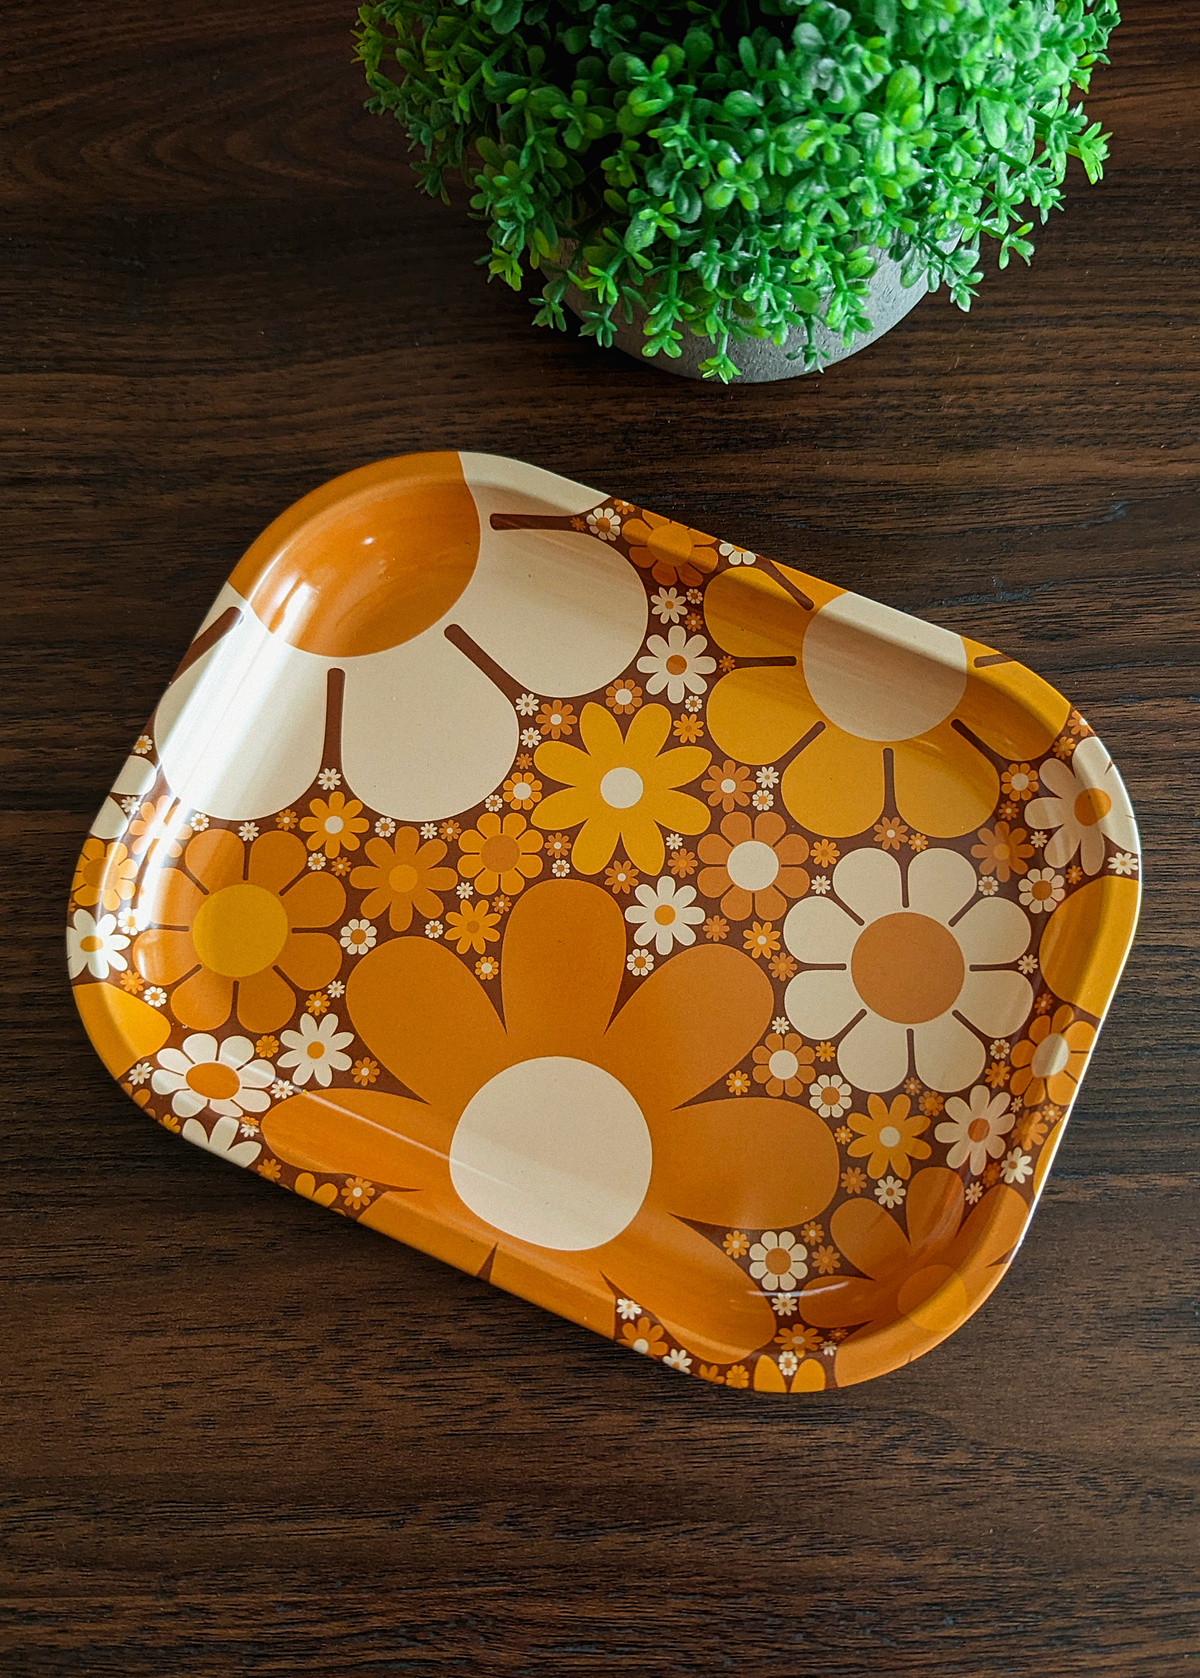 60s floral flower power yellow and orange metal catch all tray